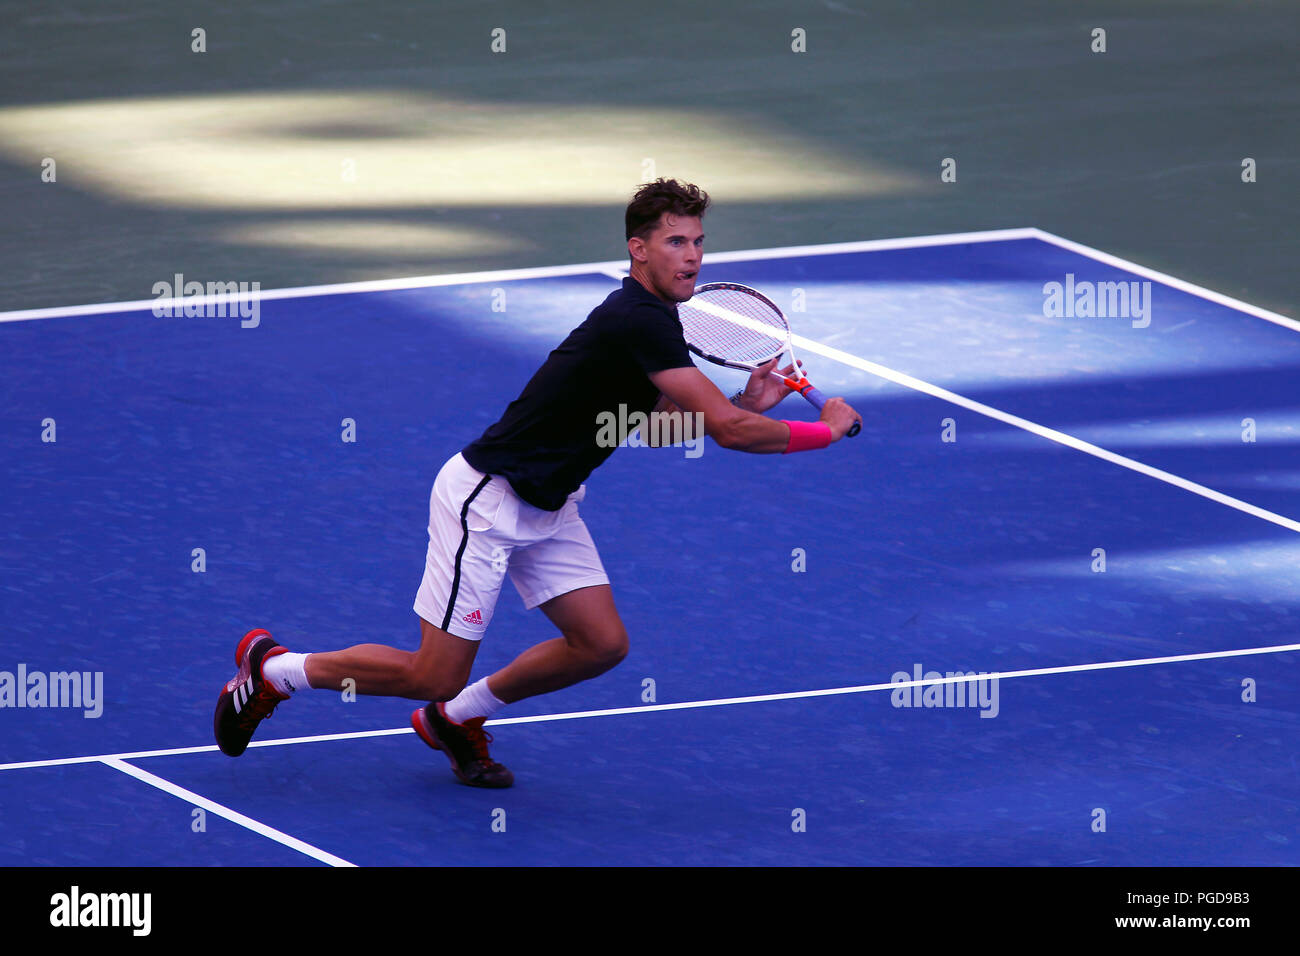 New York, N.Y, August 25, 2018 - US Open Tennis Practice:  Dominic Thiem of Austria practicing at the Billie Jean King National Tennis Center in Flushing Meadows, New York, as players prepared for the U.S. Open which begins on Monday. Credit: Adam Stoltman/Alamy Live News Stock Photo